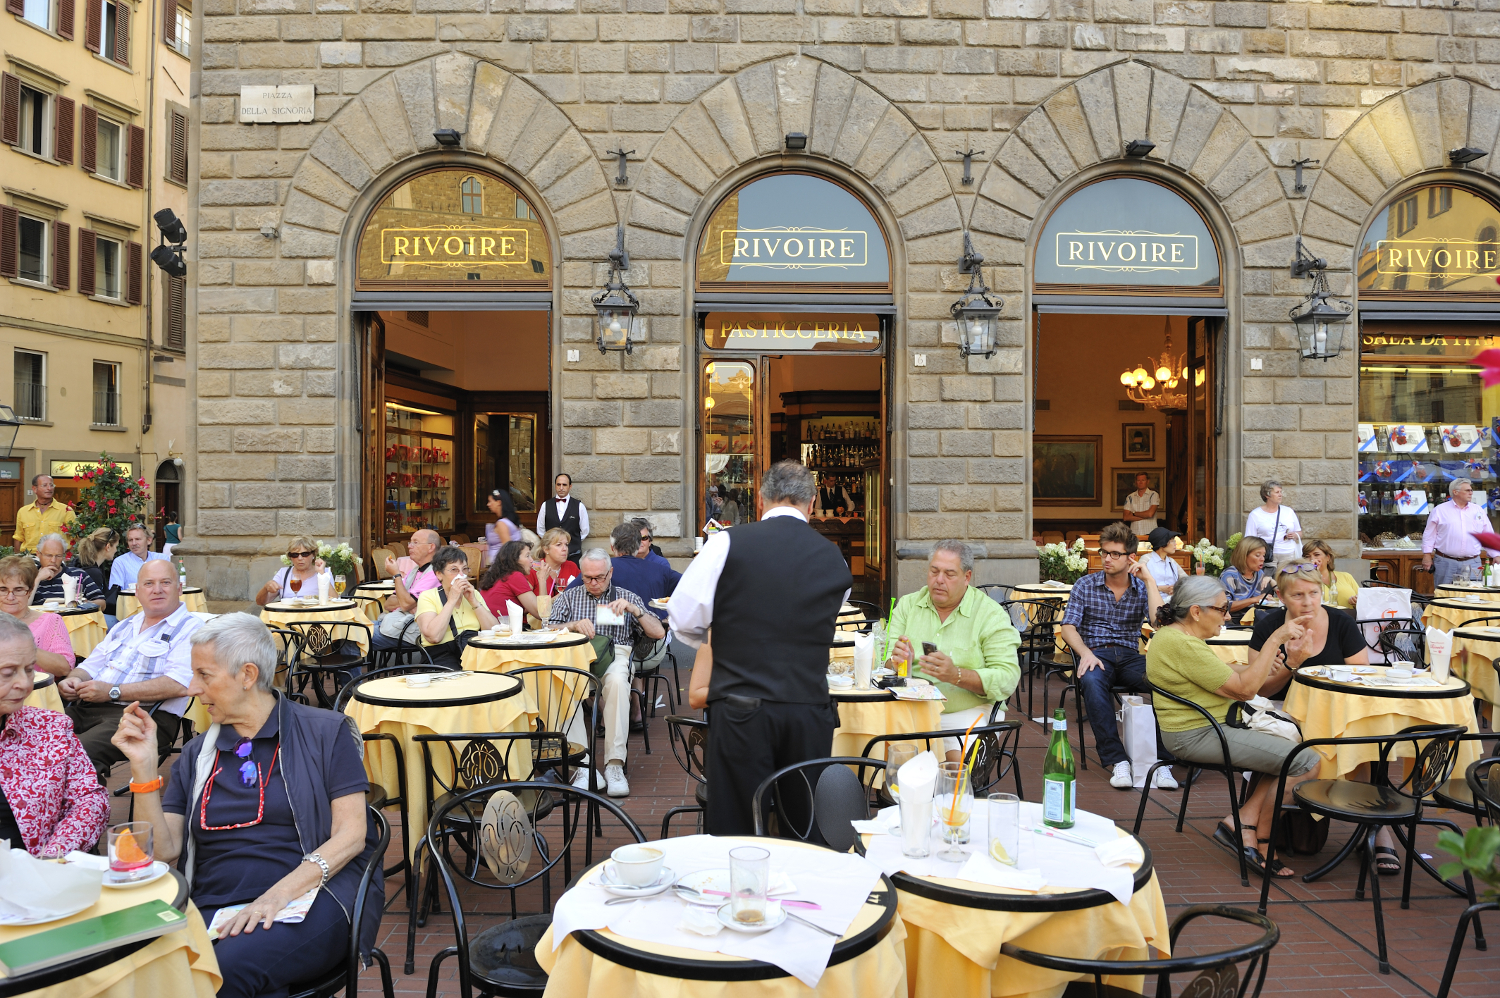 Caffè Rivoire on Piazza della Signoria is the perfect place for people watching